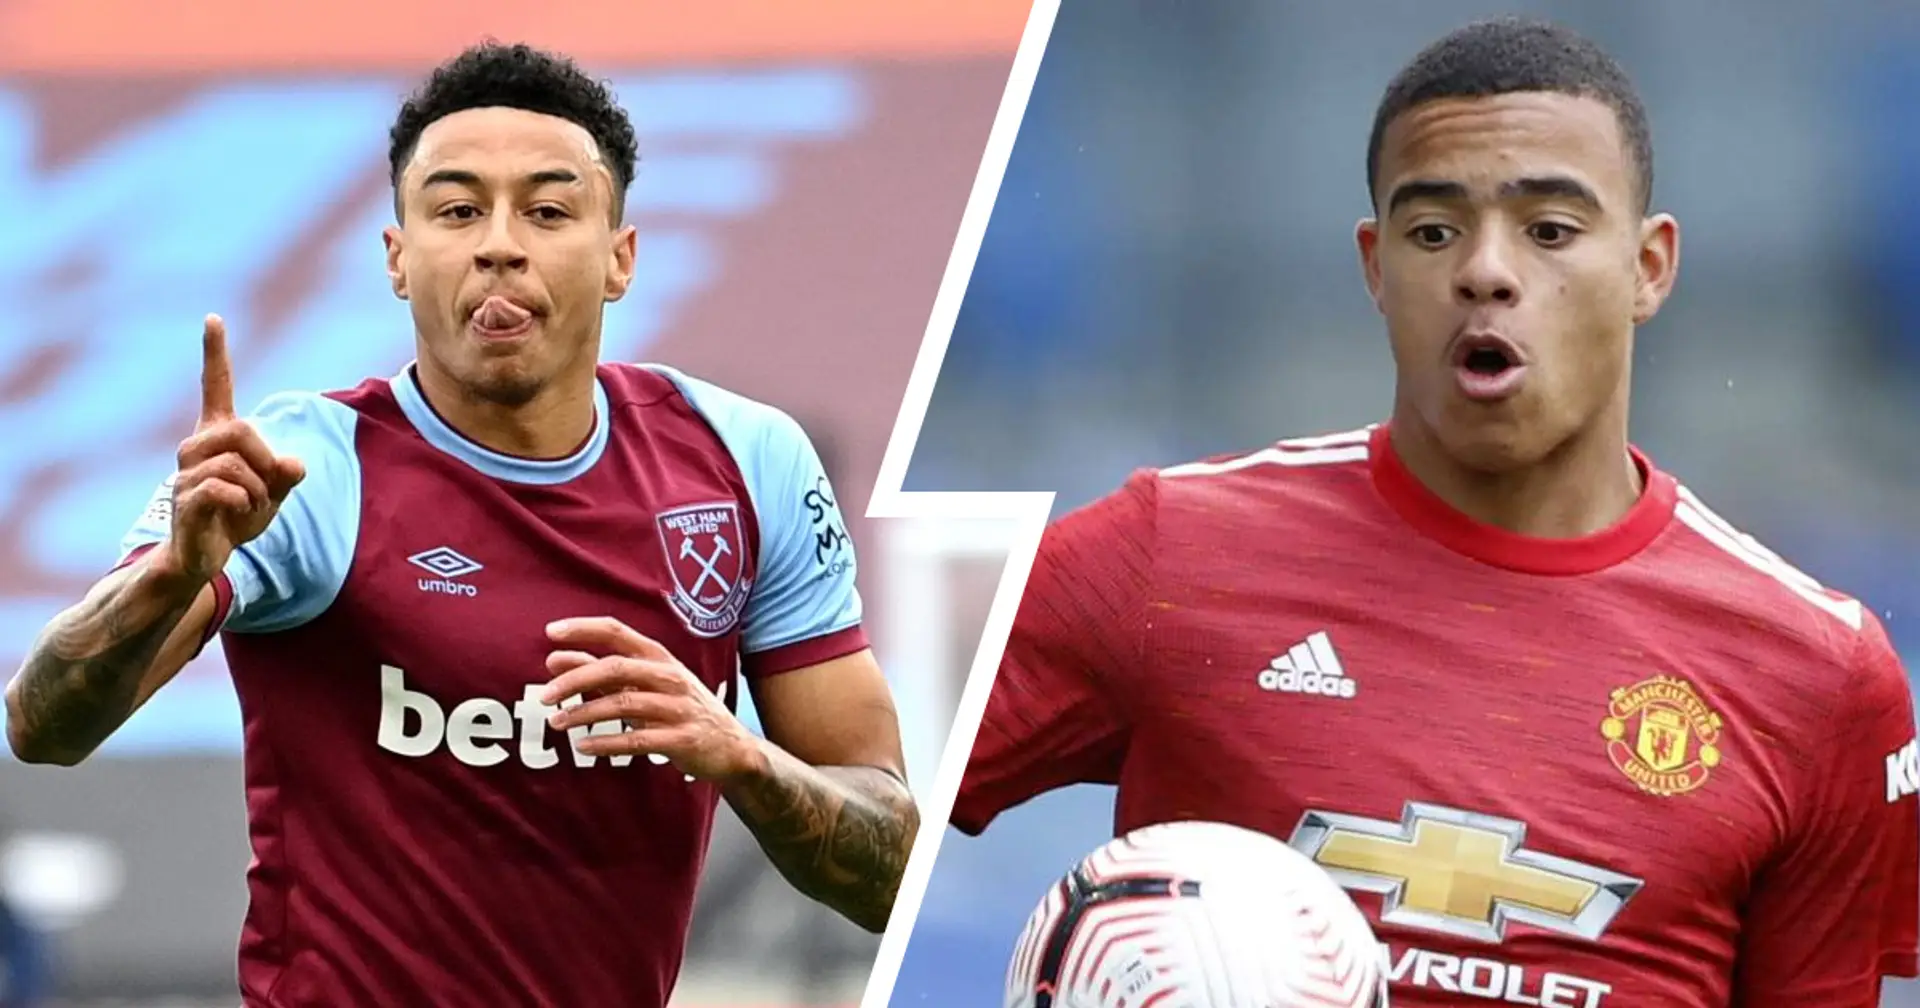 Jesse Lingard and Mason Greenwood nominated for PL Player of the Month